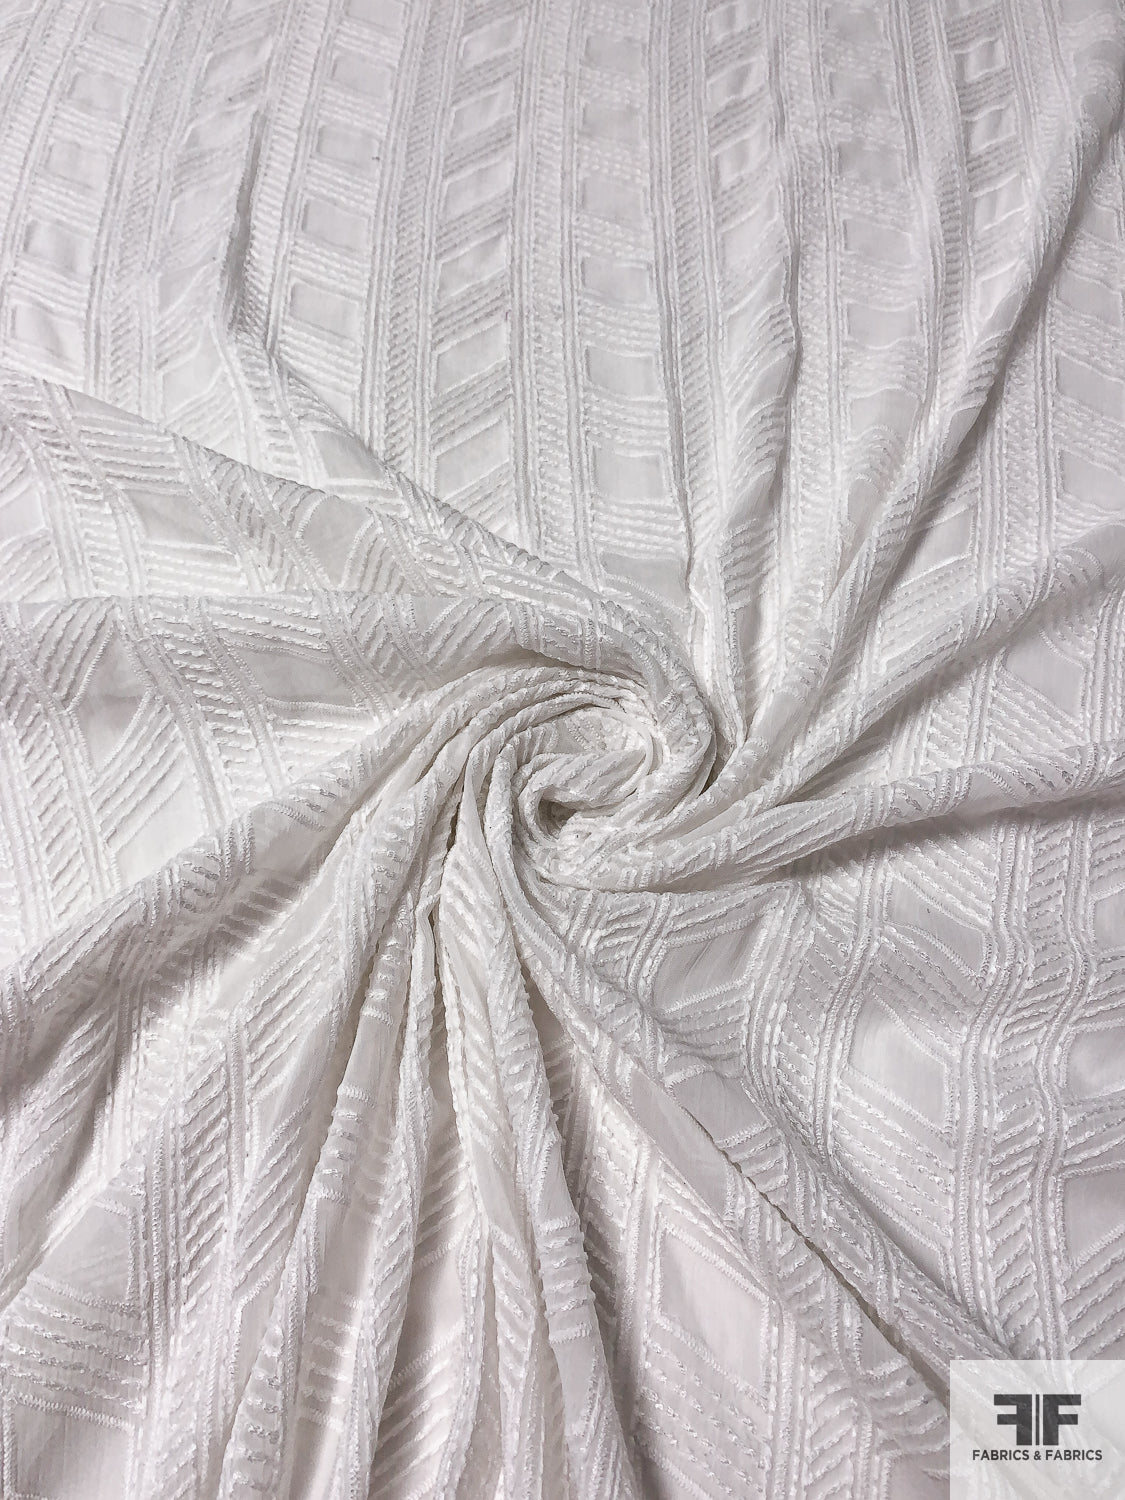 Herringbone-Inspired Embroidered Crinkled Polyester Chiffon - Off-White